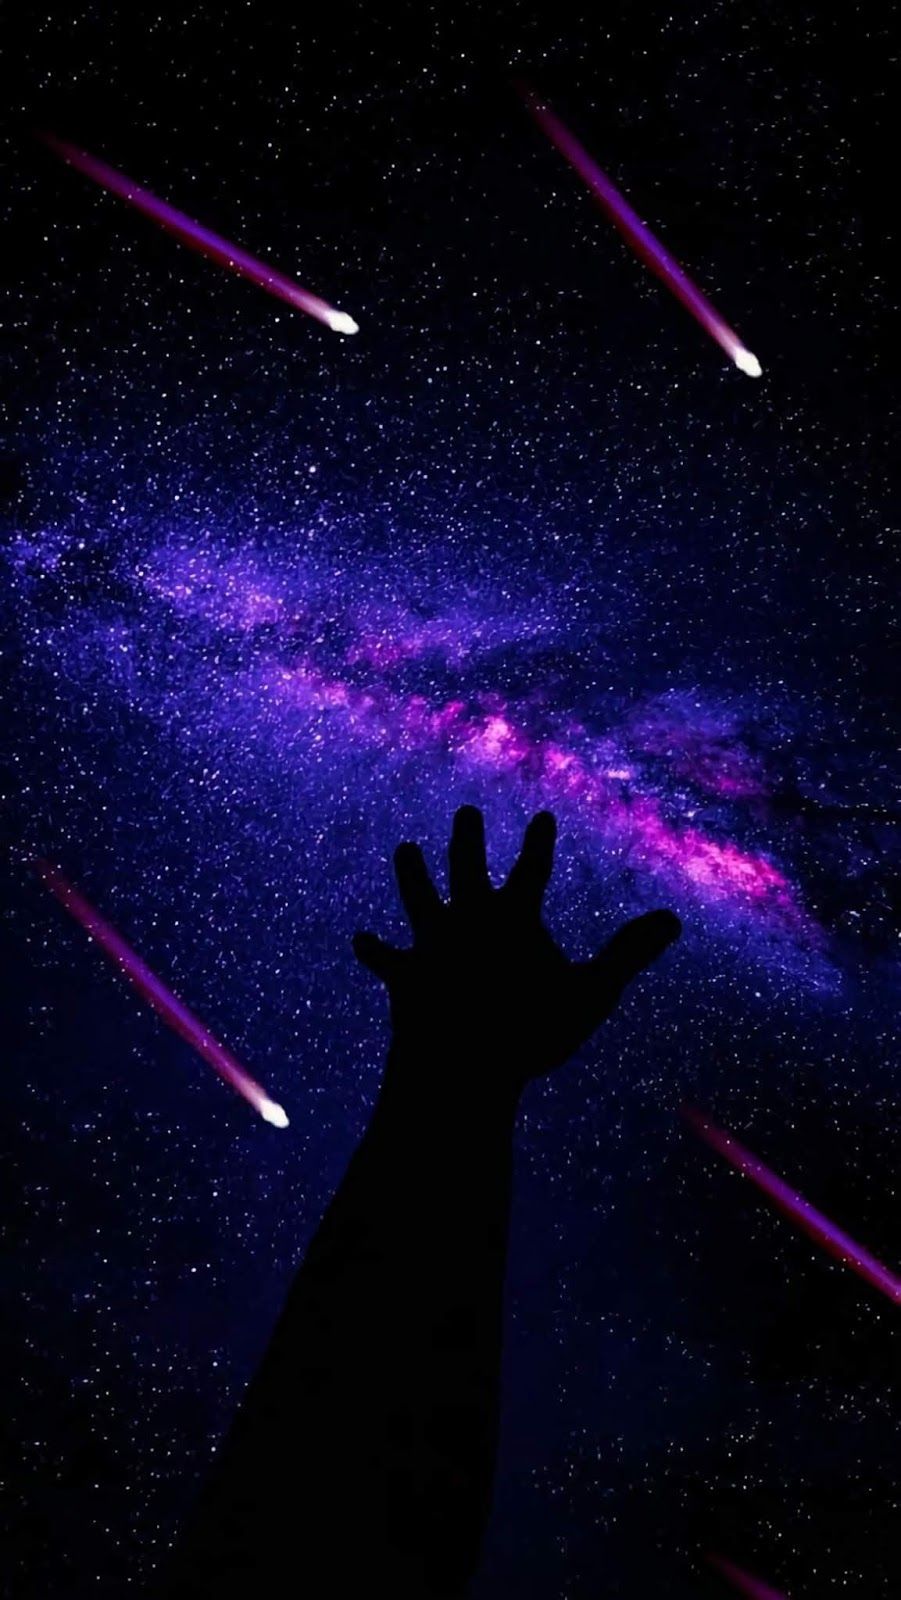 Catching the universe #wallpaper #iphone #android #background